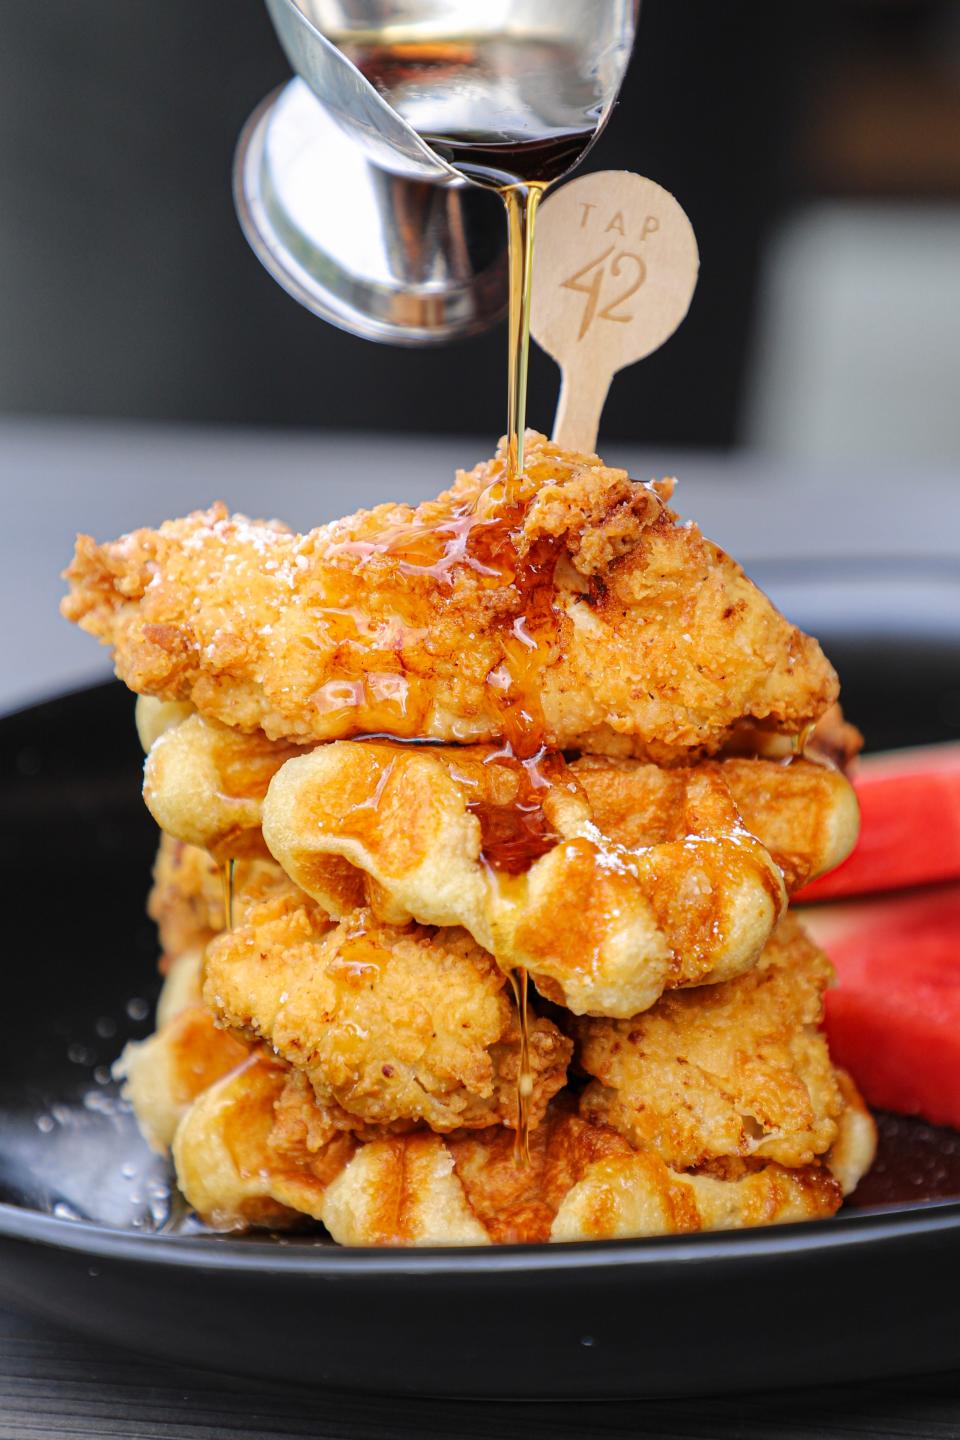 Chicken and waffles are on the brunch menu at Tap 42. The South Florida chain plans to open a restaurant at The Gardens Mall in Palm Beach Gardens.